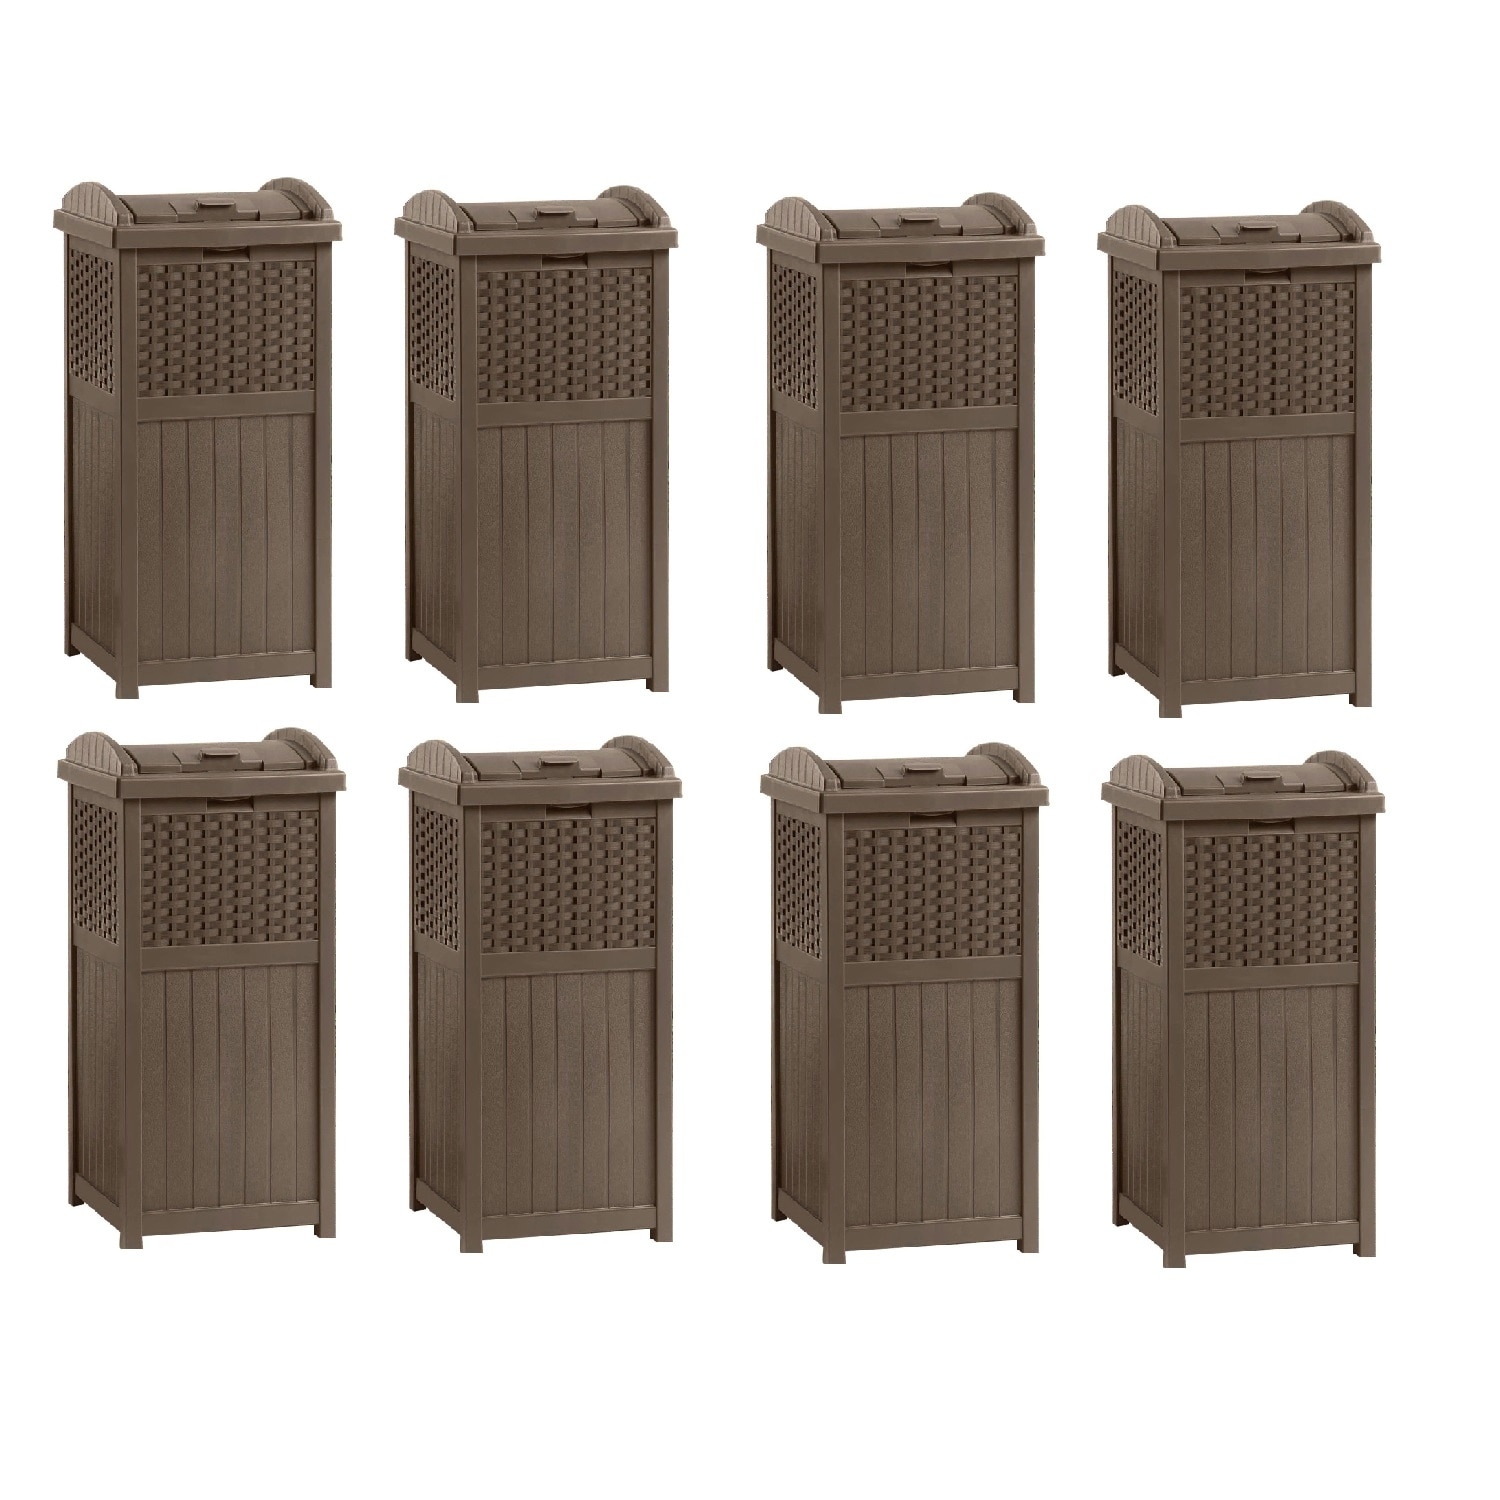 Keter Copenhagen Brown 32 Gallon Resin Large Trash Can with Lid